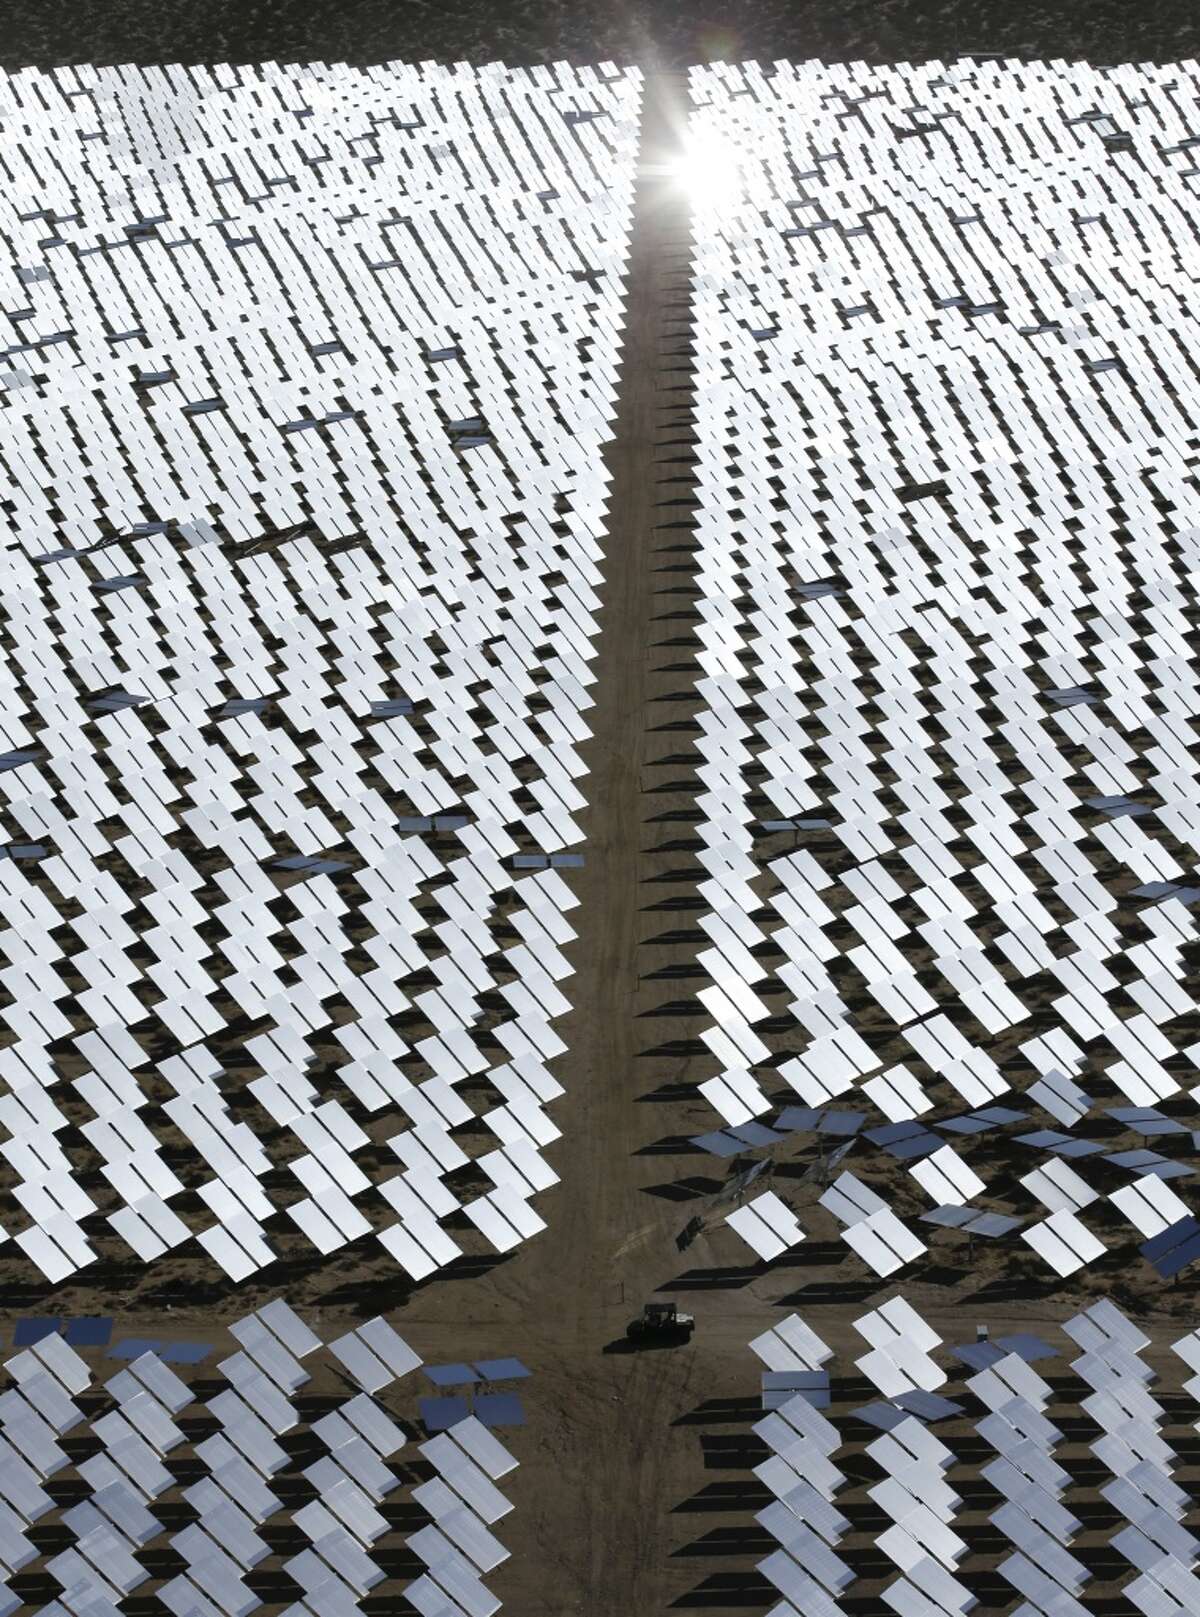 Some of the 300,000 computer-controlled mirrors, each about 7 feet high and 10 feet wide, reflect sunlight to boilers that sit on 459-foot towers. The sun's power is used to heat water in the boilers' tubes and make steam, which in turn drives turbines to create electricity in Primm, Nev. The Ivanpah Solar Electric Generating System, sprawling across roughly 5 square miles of federal land near the California-Nevada border, opened in 2014 after years of regulatory and legal tangles.